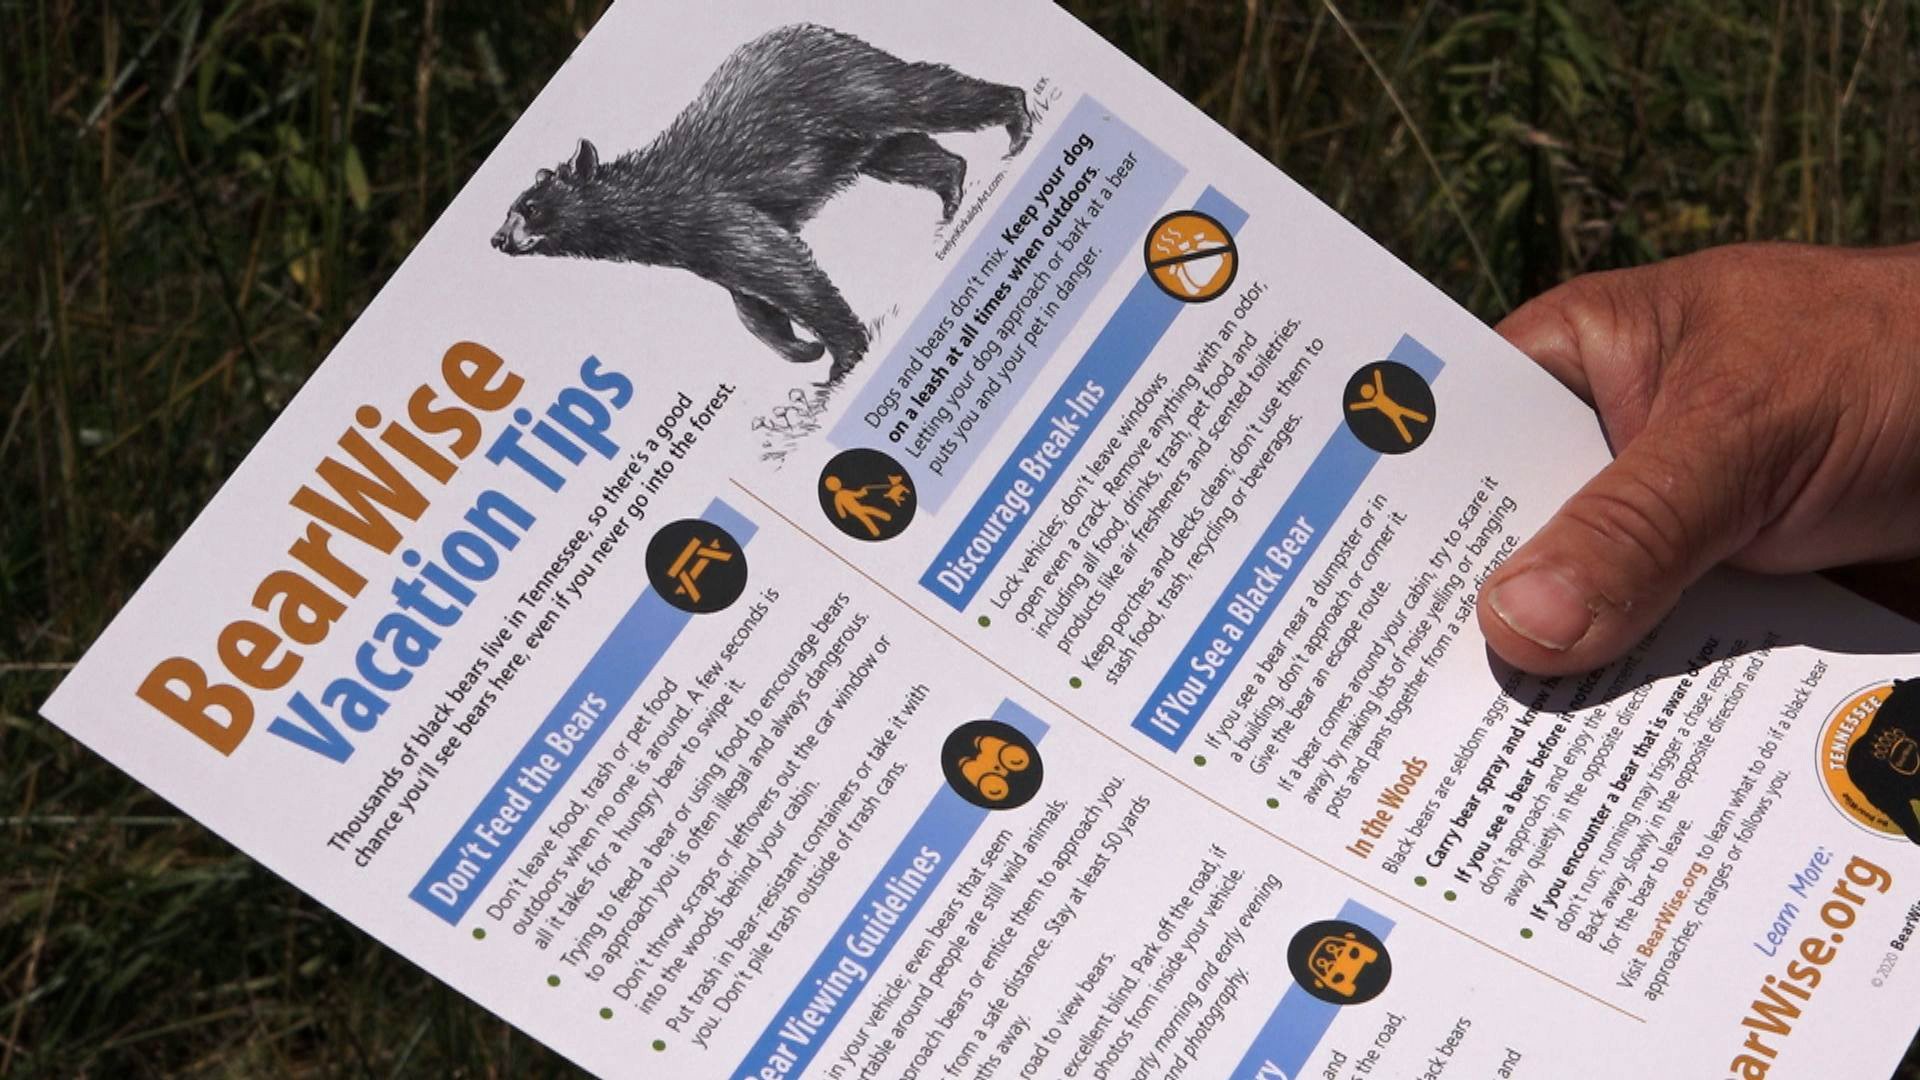 In areas around the Great Smoky Mountains, it's a never-ending struggle to educate tourists how to behave around bears. A new BearWise flier aims to help at lodging.